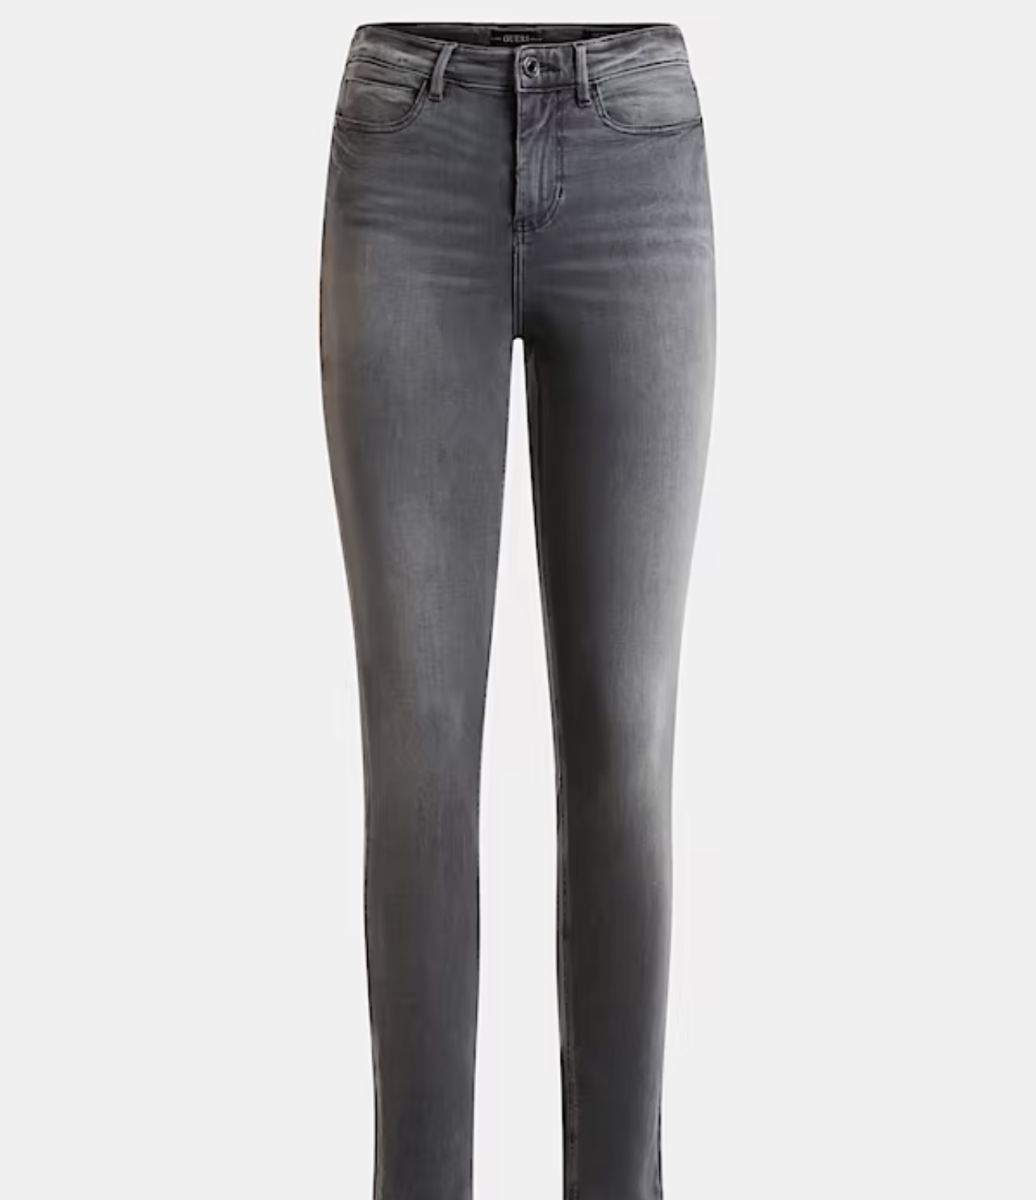 GUESS 1981 SKINNY JEANS GREY